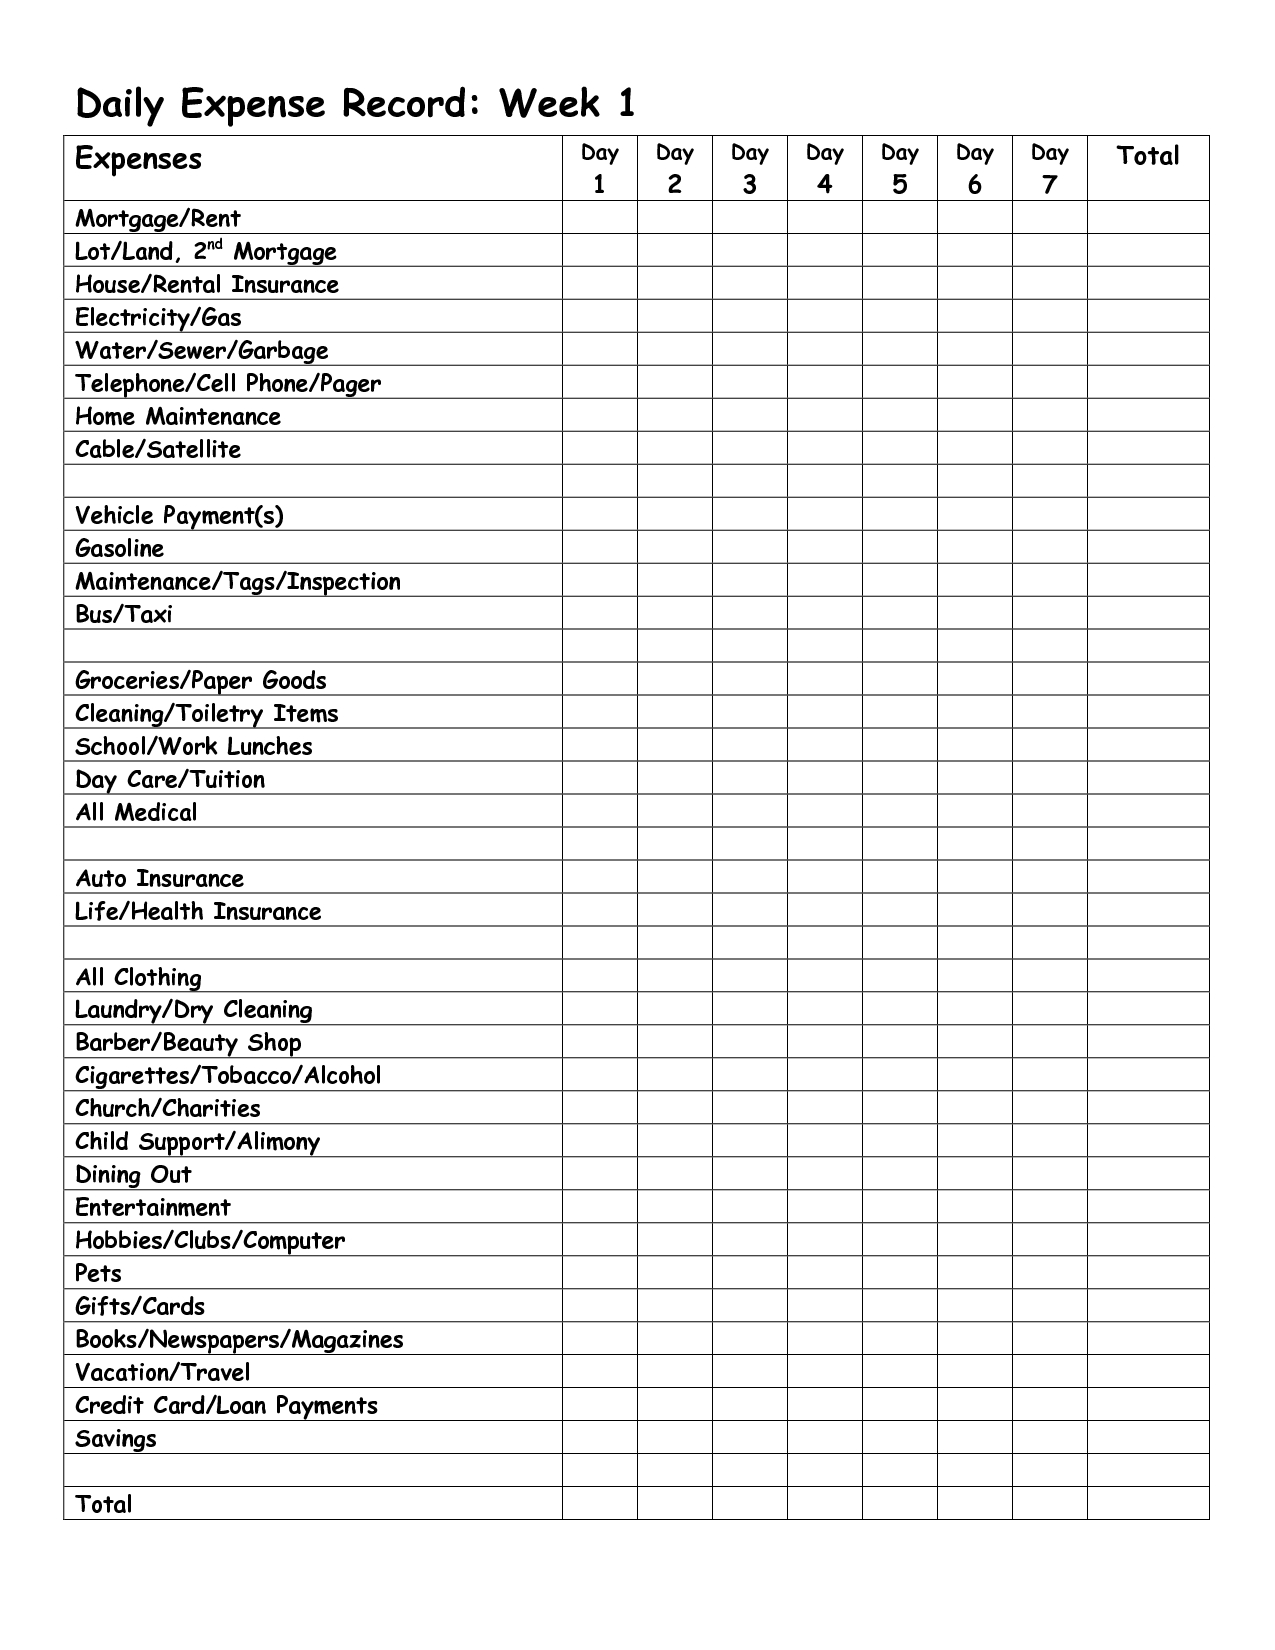 Monthly Expense Report Template Daily Record Week In Expense Report Template Excel 2010